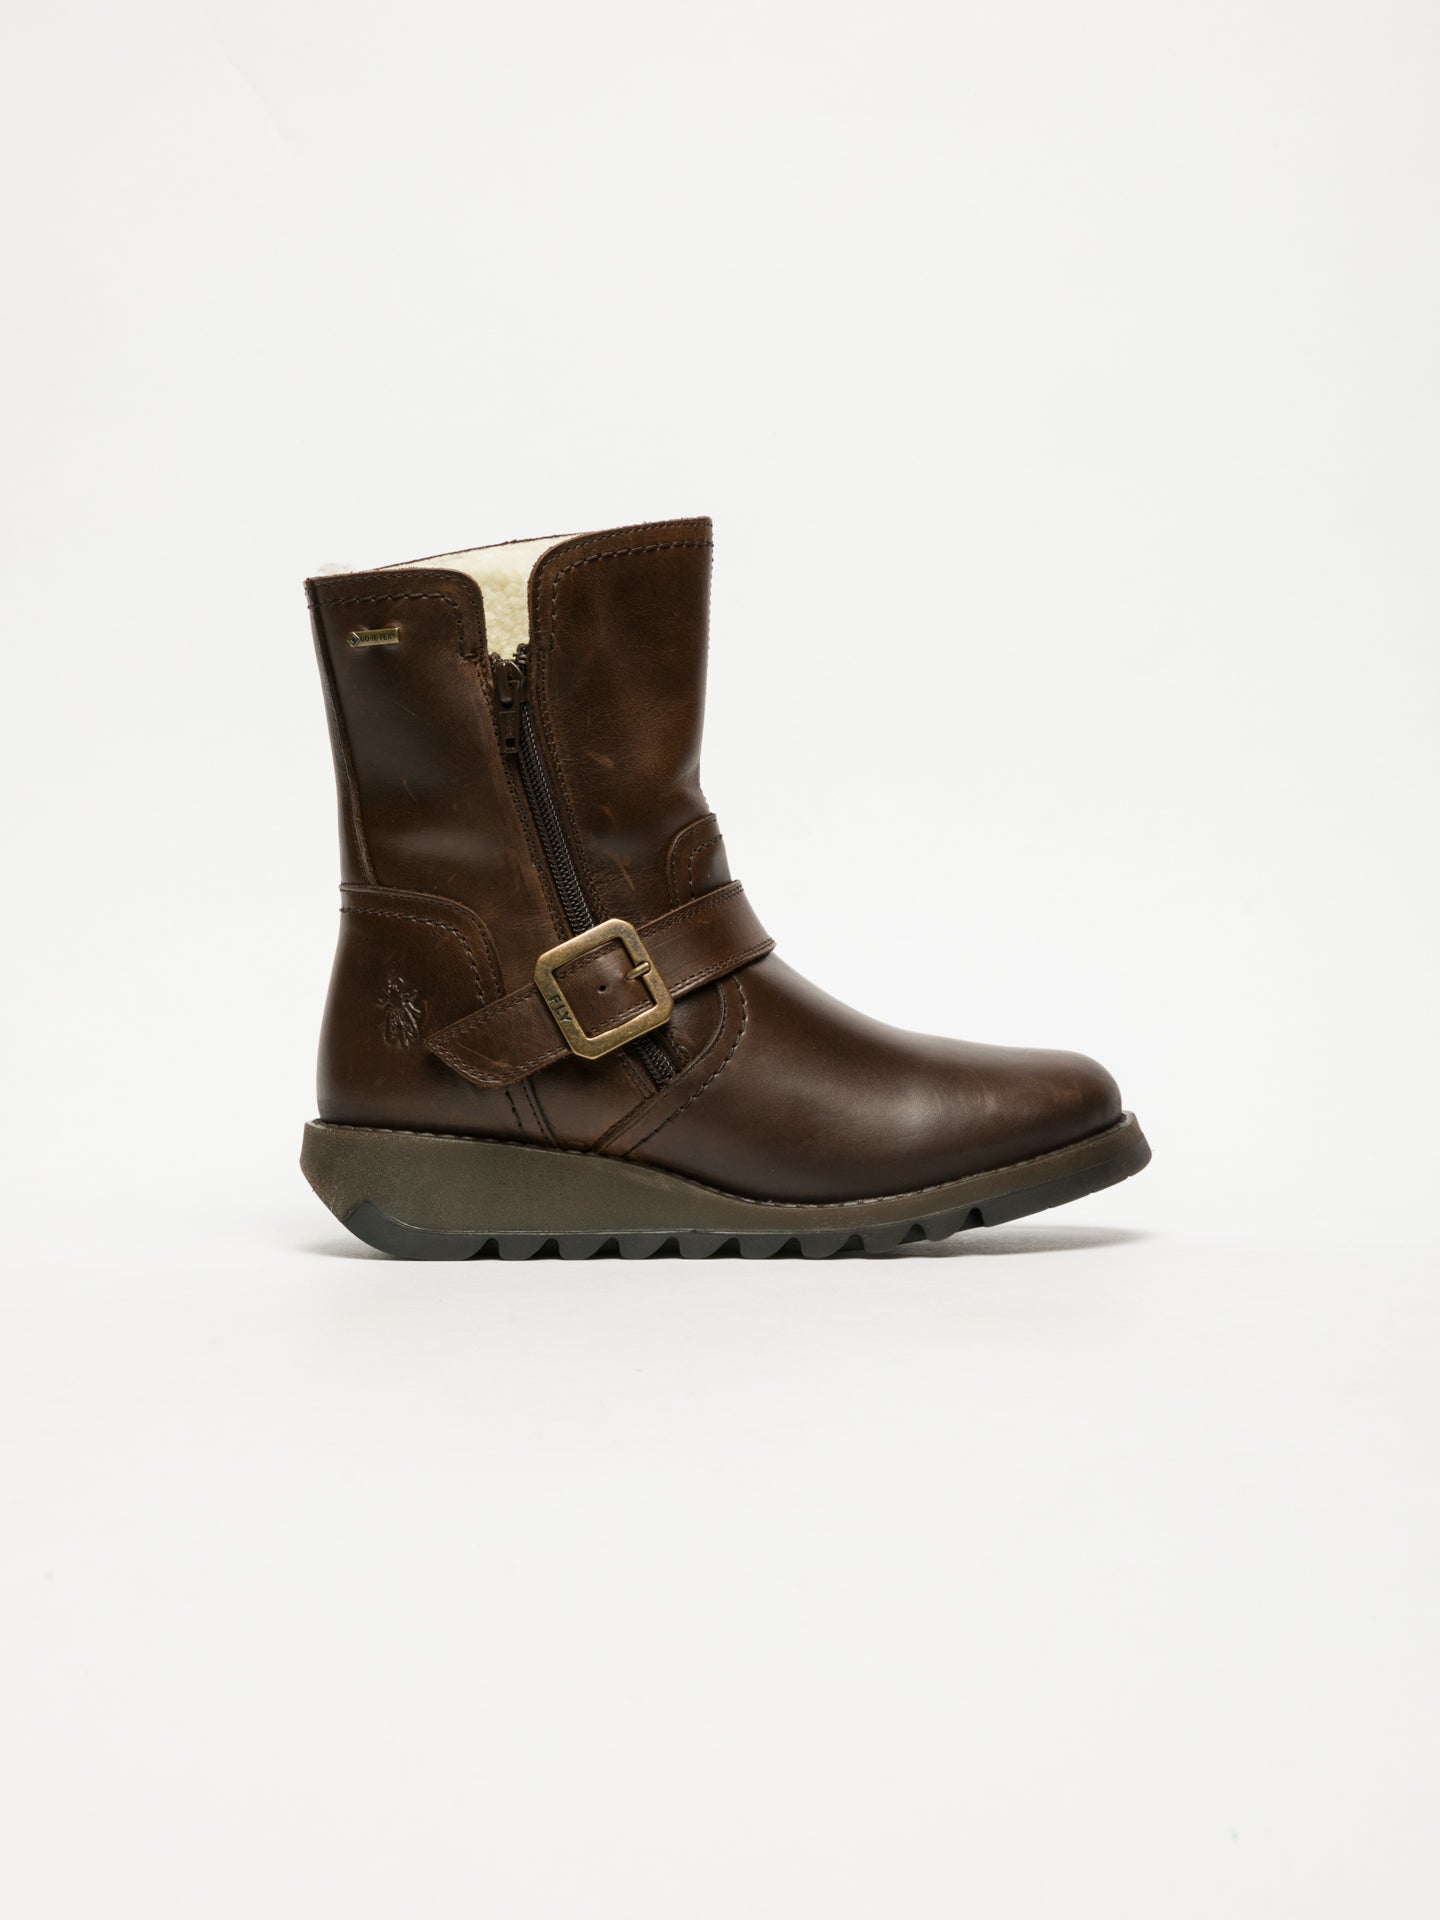 Fly London Brown Buckle Ankle Boots